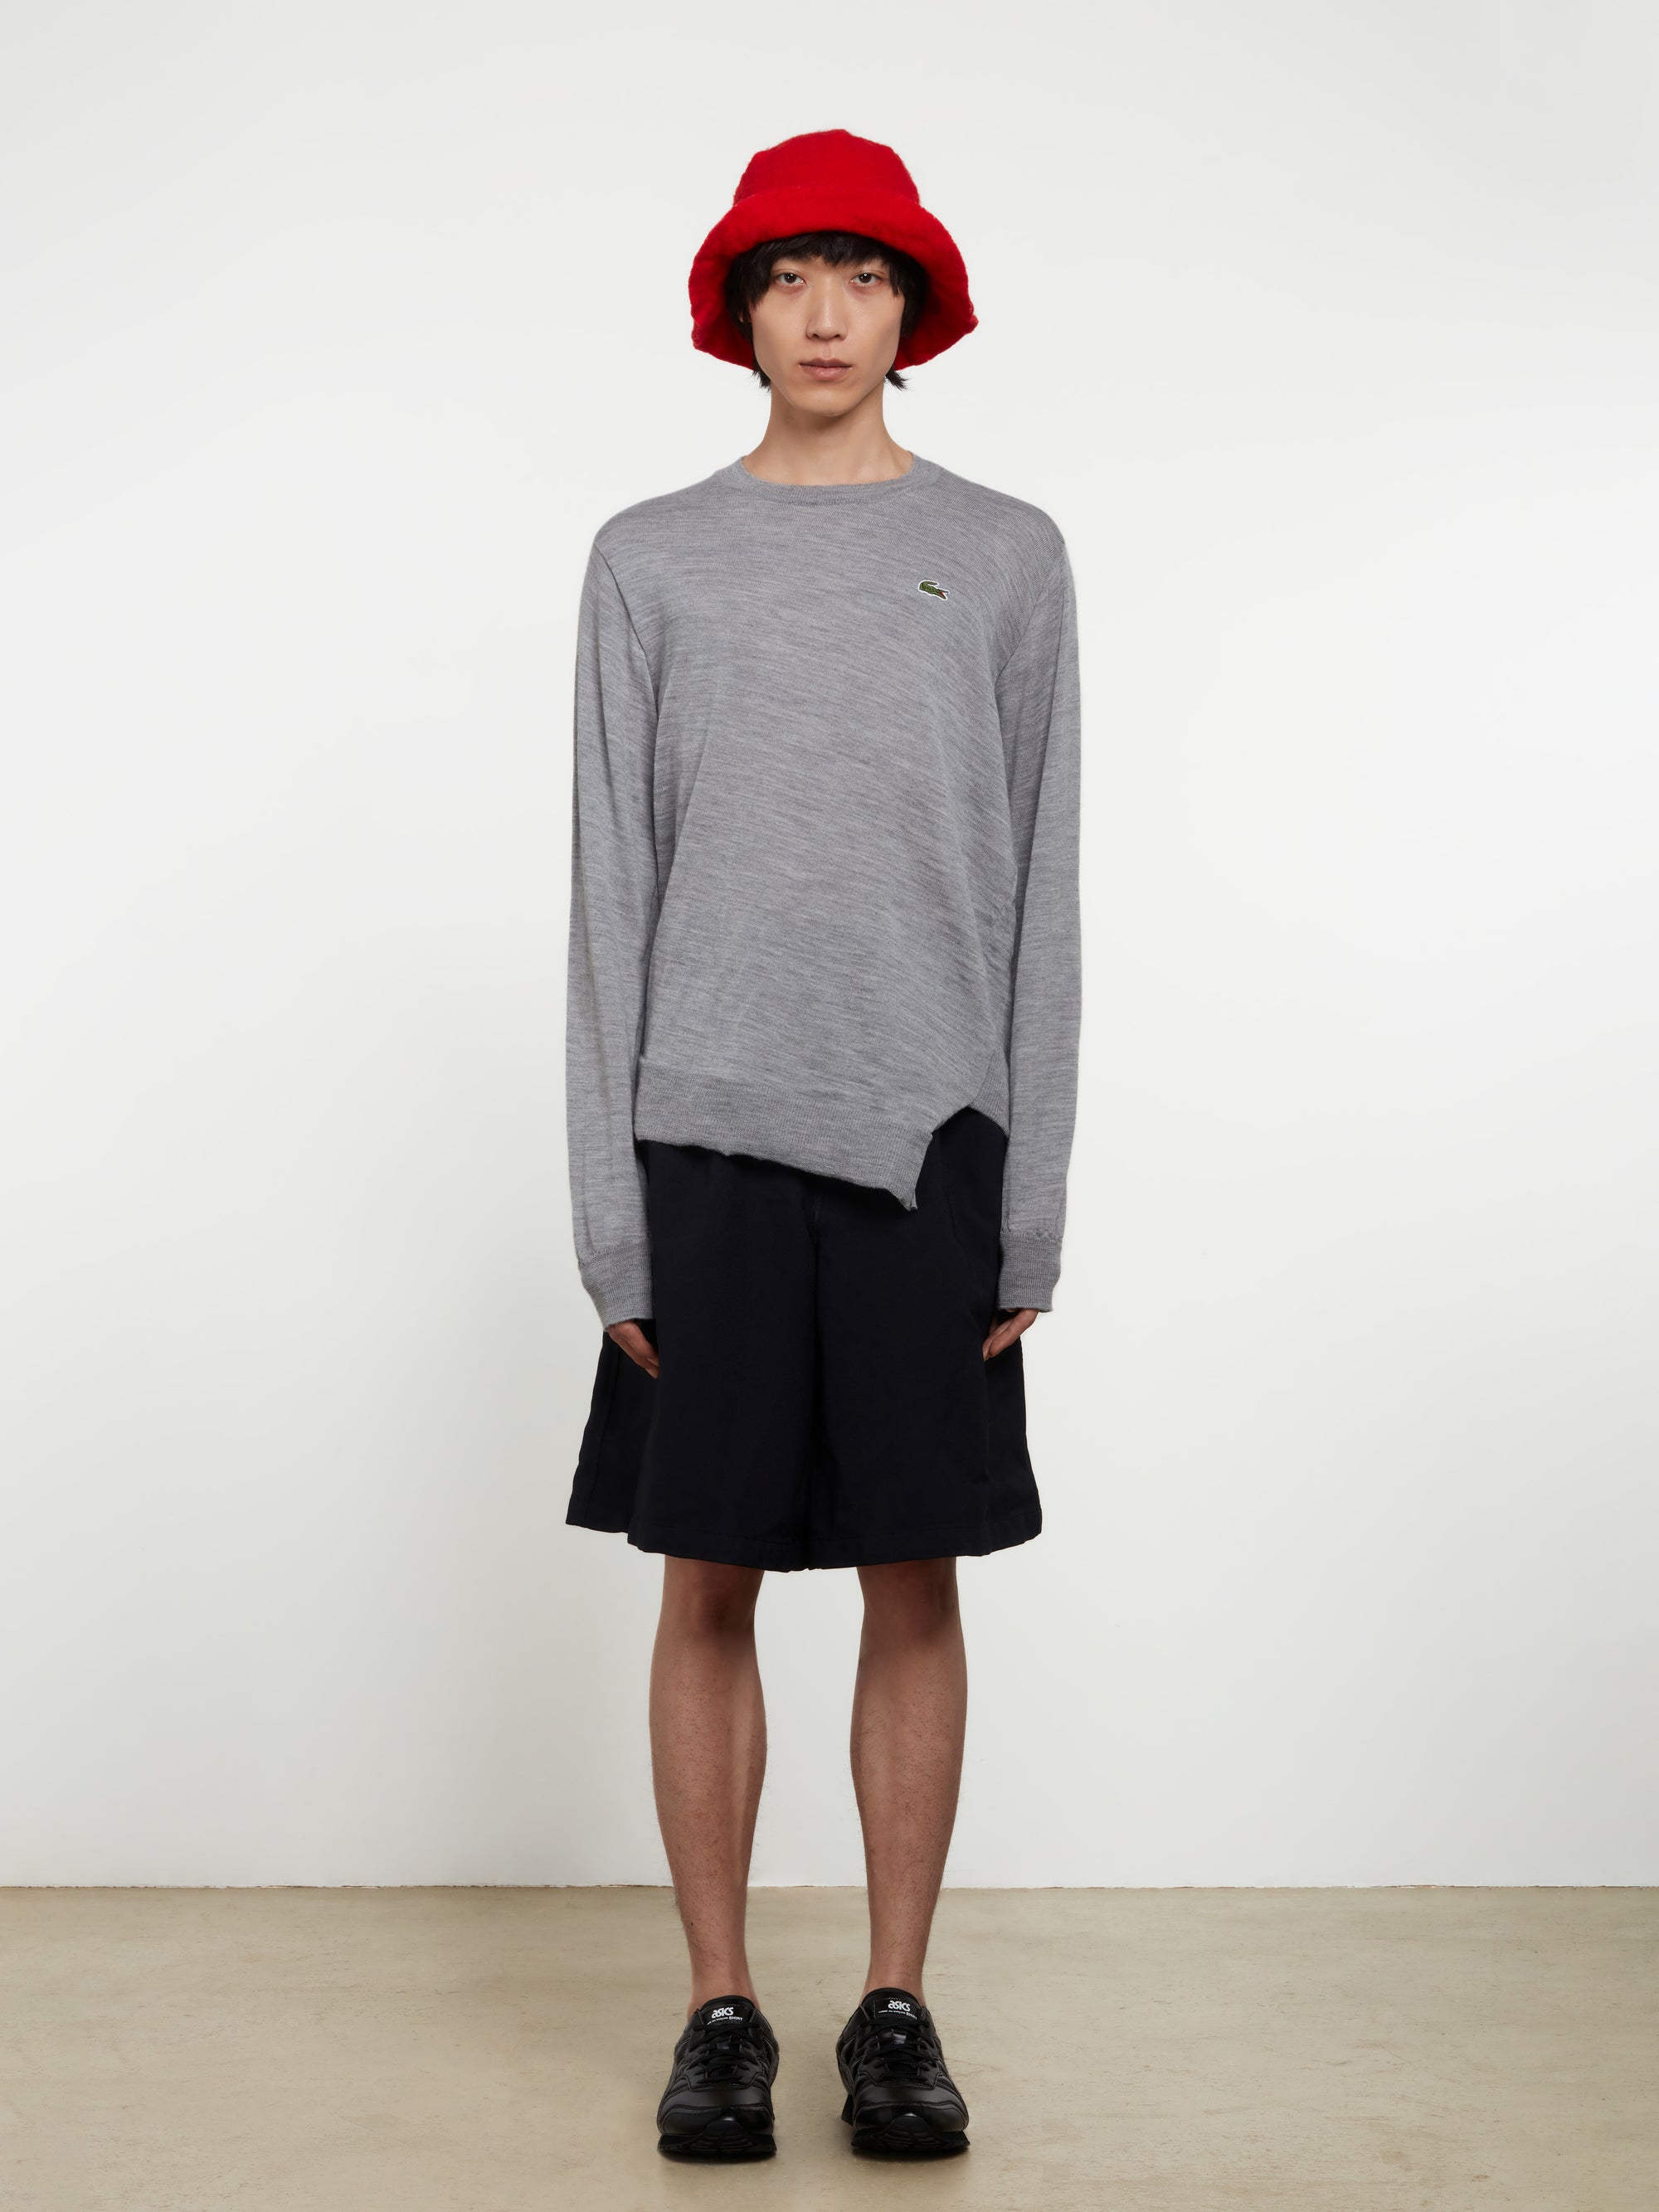 CDG Shirt - Lacoste Men’s Knit Sweater - (Grey) view 4